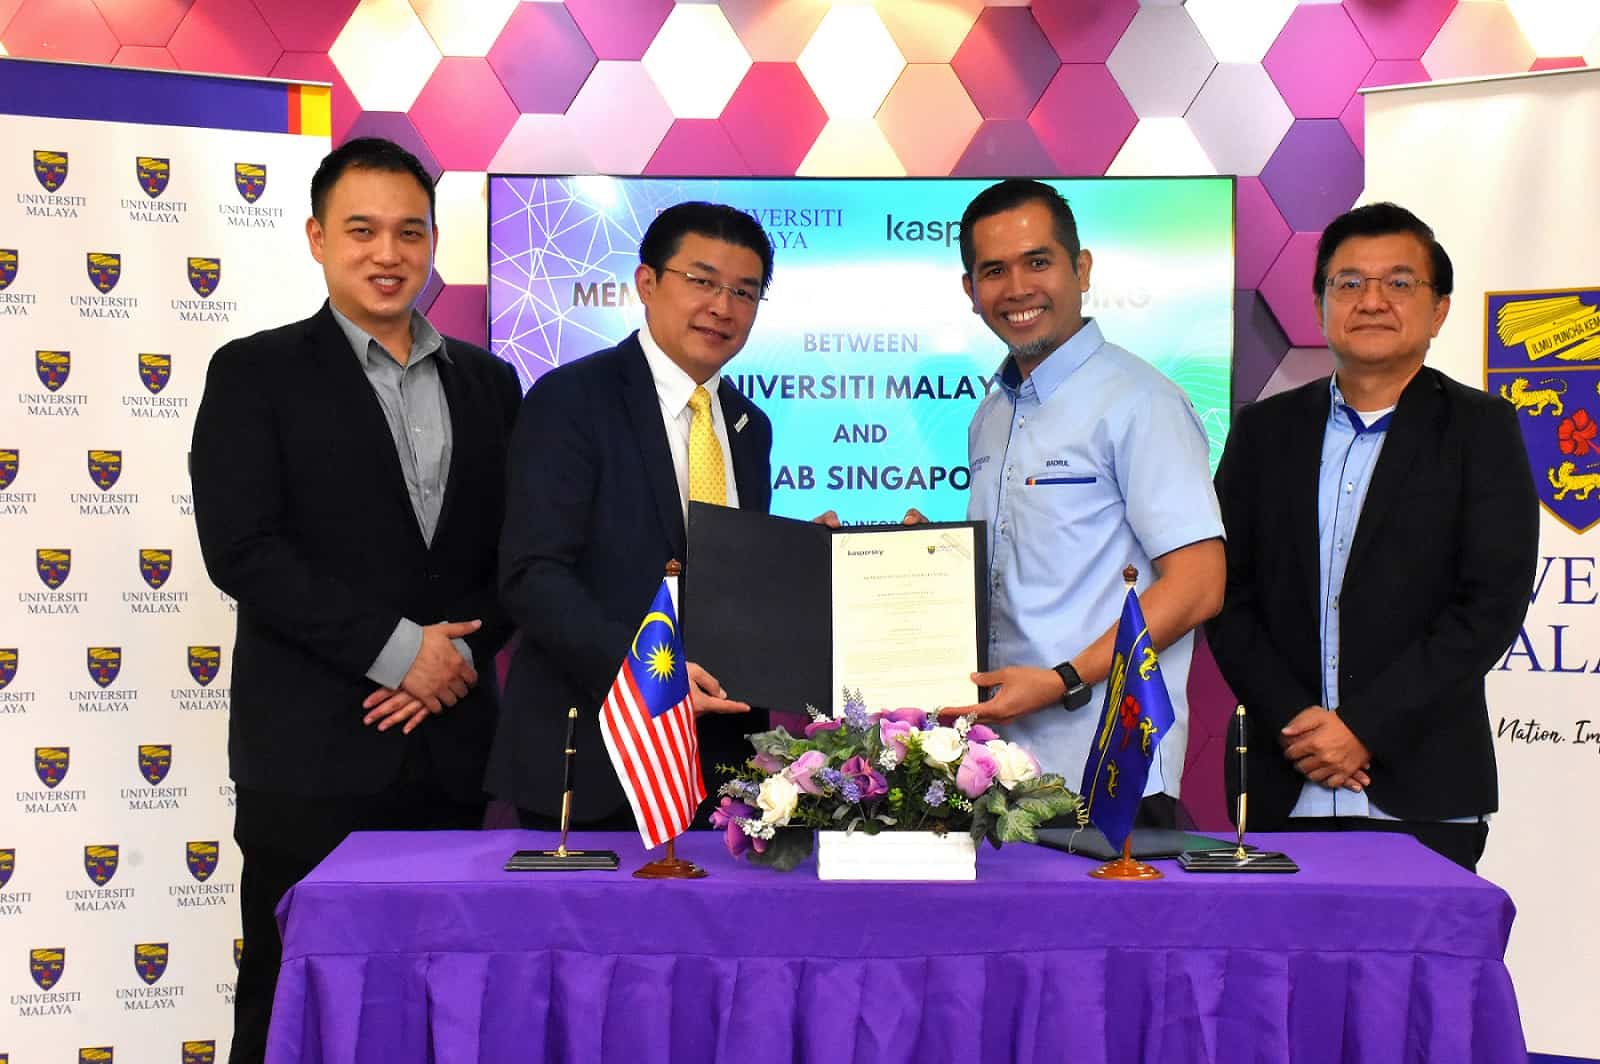 Kaspersky and Universiti Malaya ink MoU to further develop cybersecurity talent in Malaysia